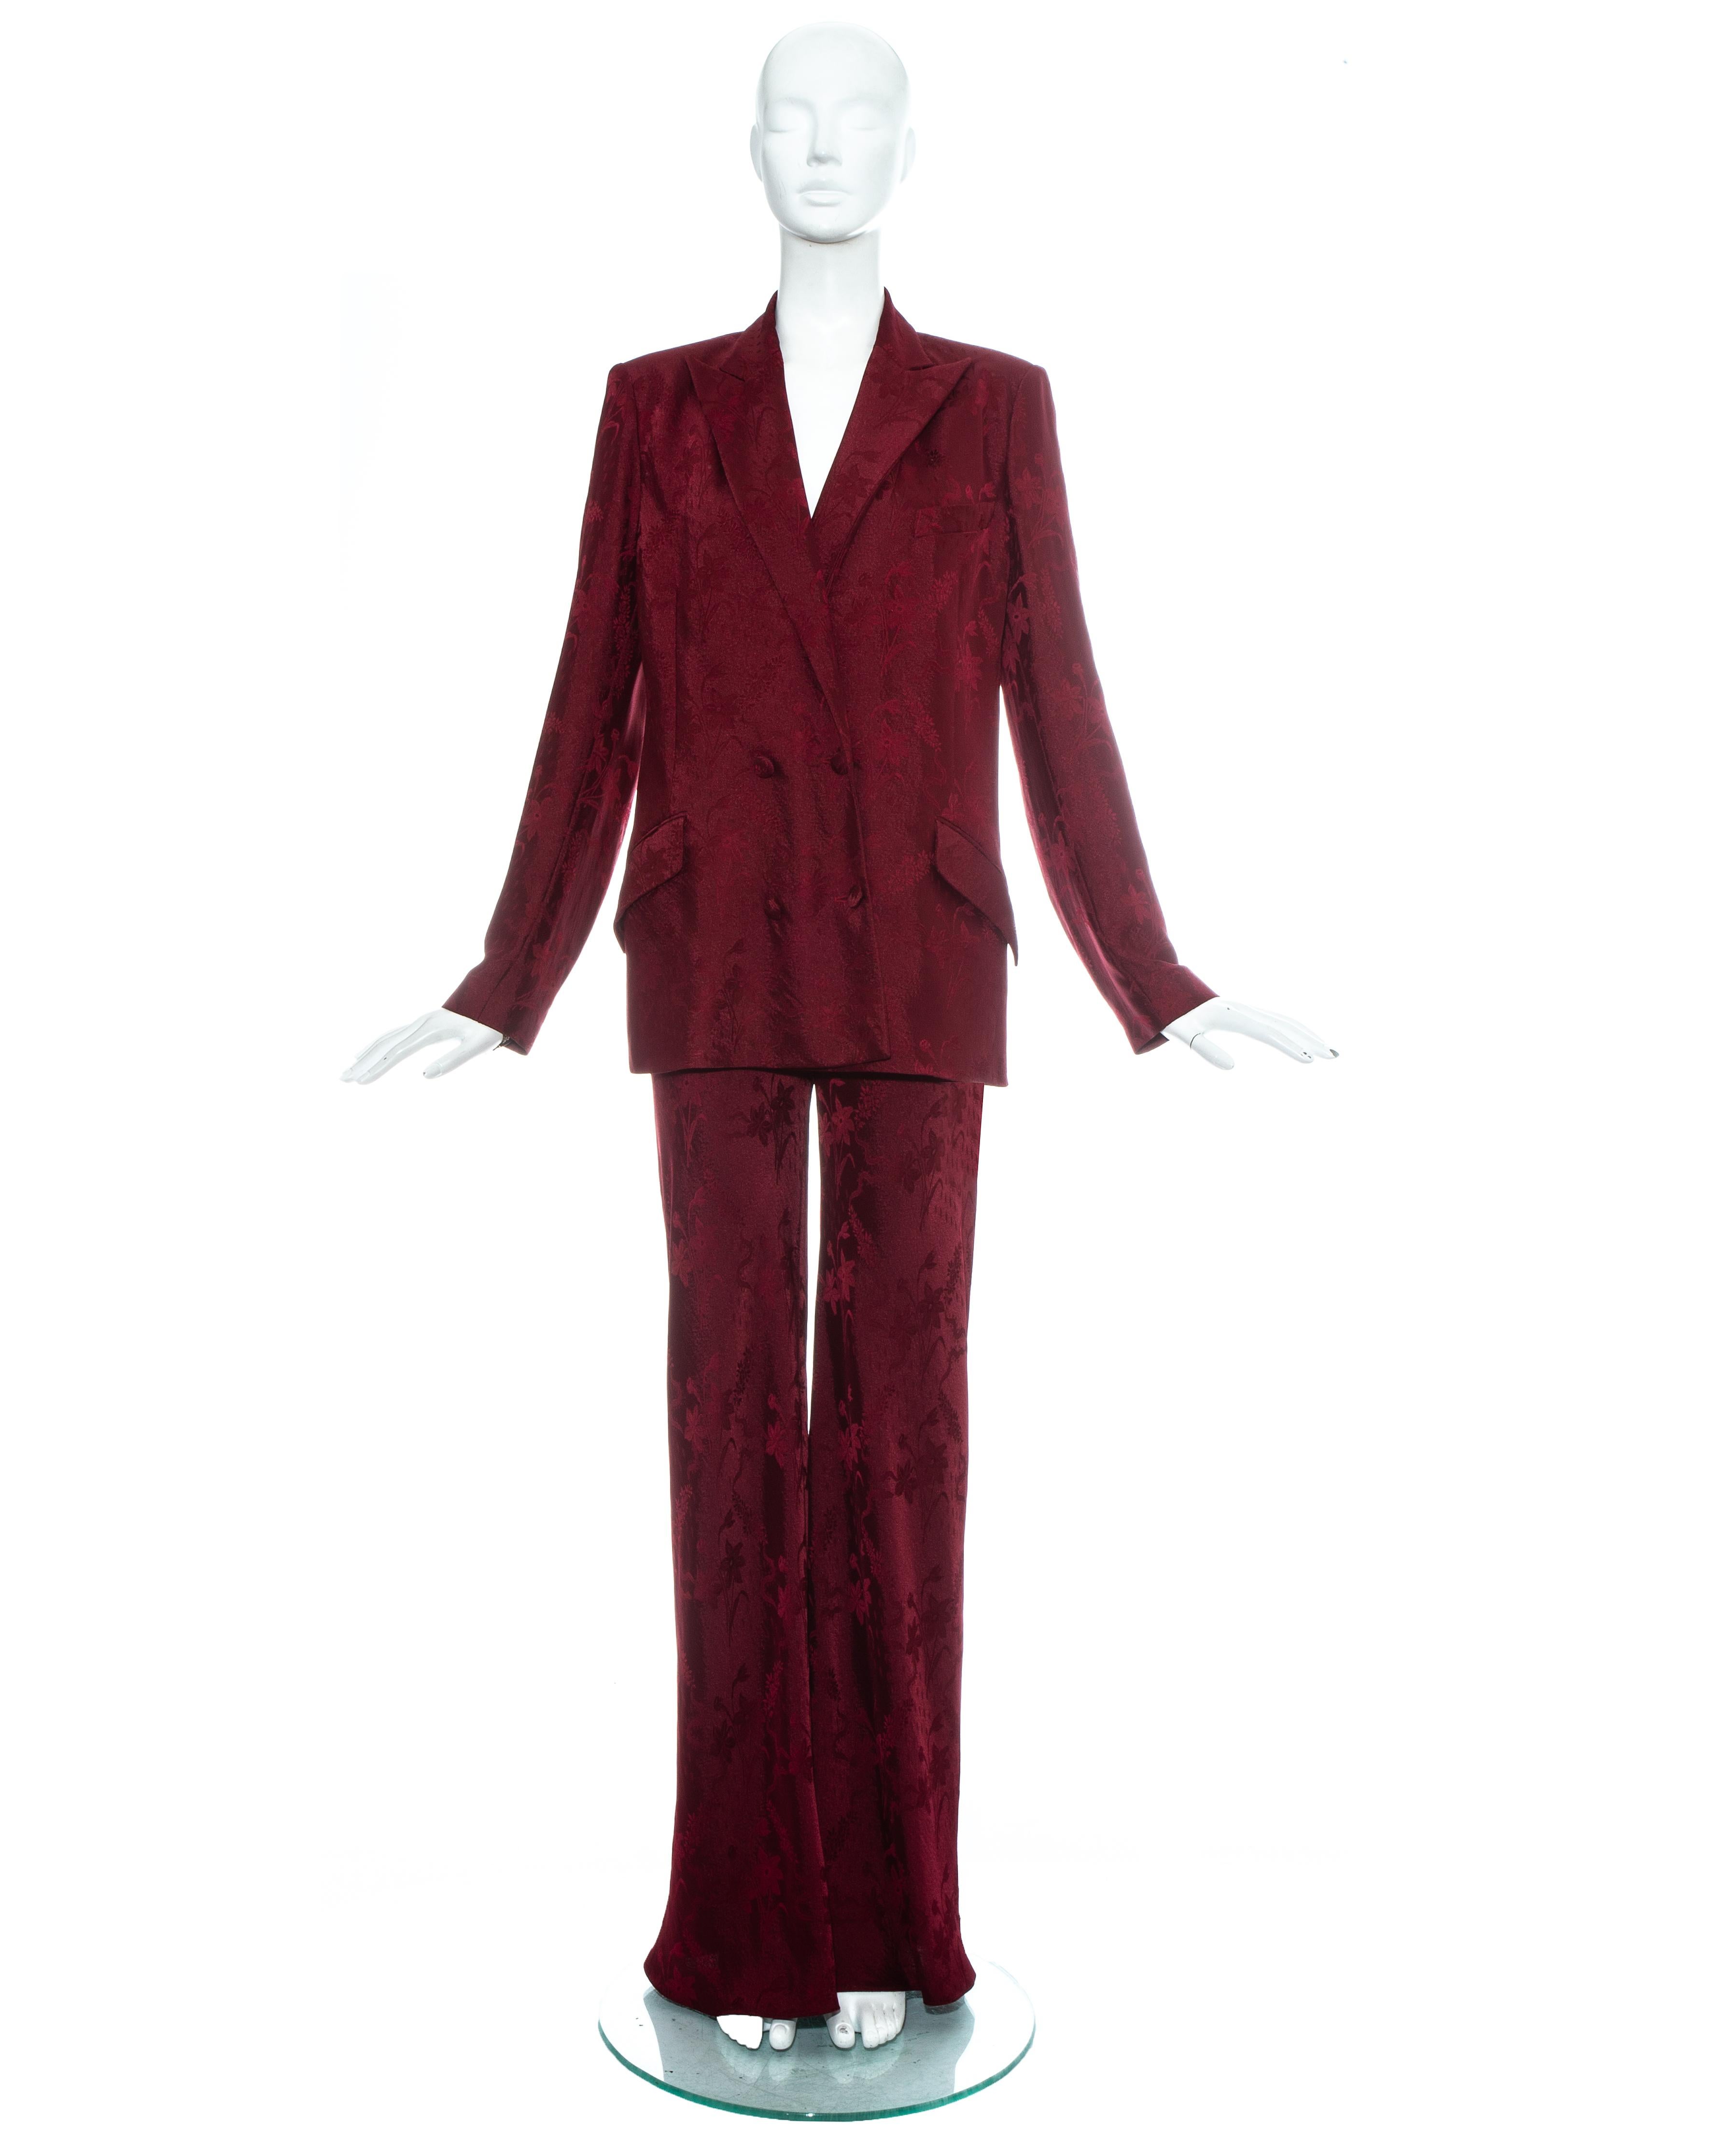 John Galliano; Burgundy floral brocade pant suit. Loose cut double breasted blazer jacket and high waisted flared pants.

Spring-Summer 1998